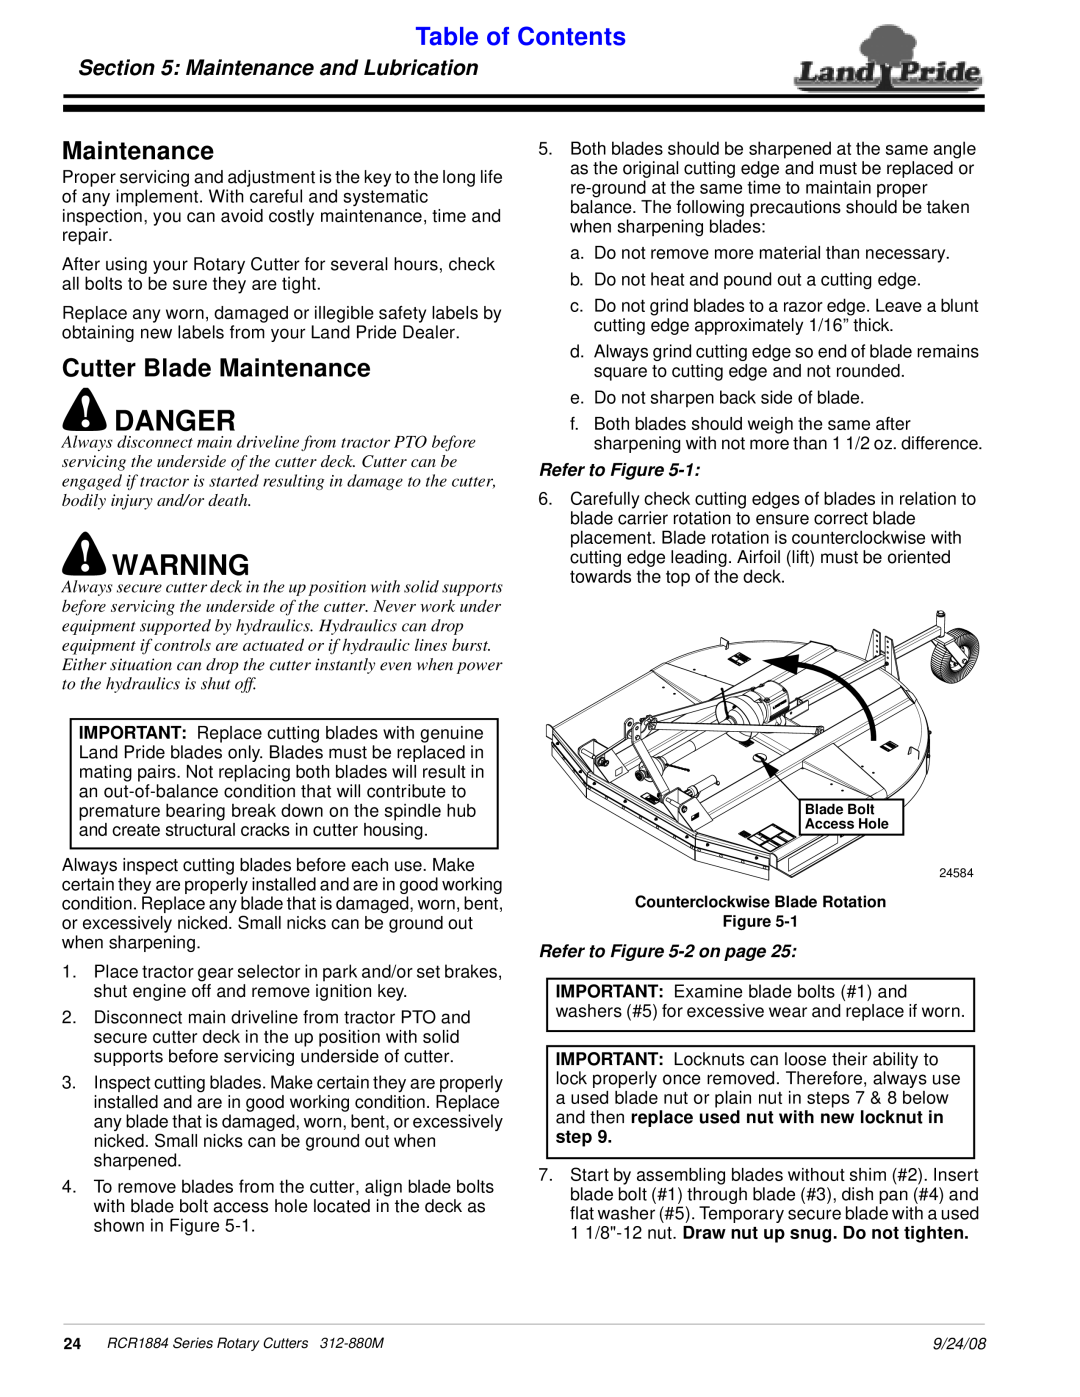 Land Pride RCR1884 Cutter Blade Maintenance, Maintenance and Lubrication, Danger, Table of Contents, Refer to Figure 